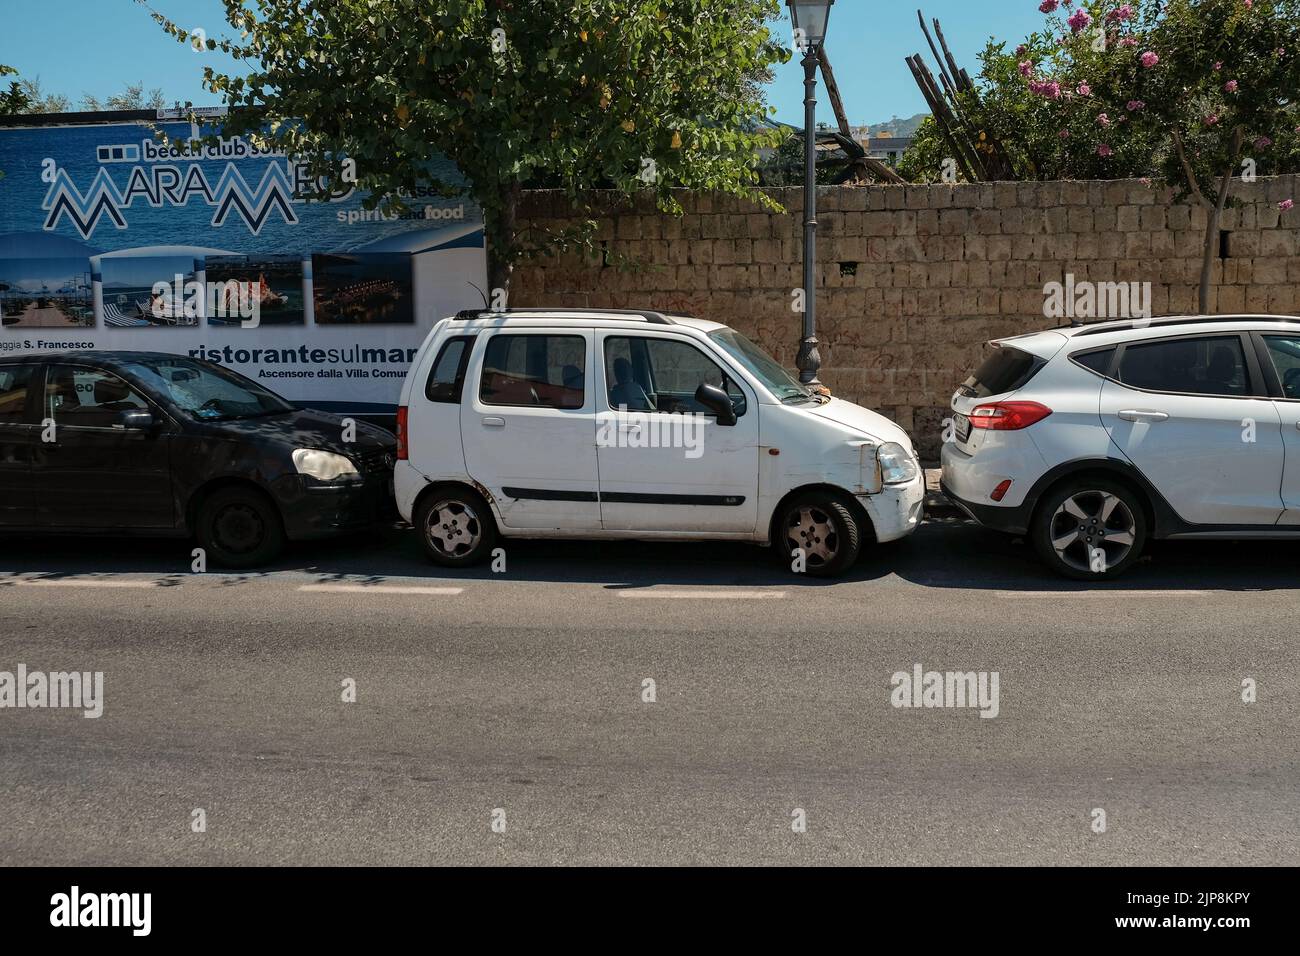 Very tight parking in Italy with a small dented family car bumper to bumper squashed in next to two cars in a parking bay with only inches to move. Stock Photo